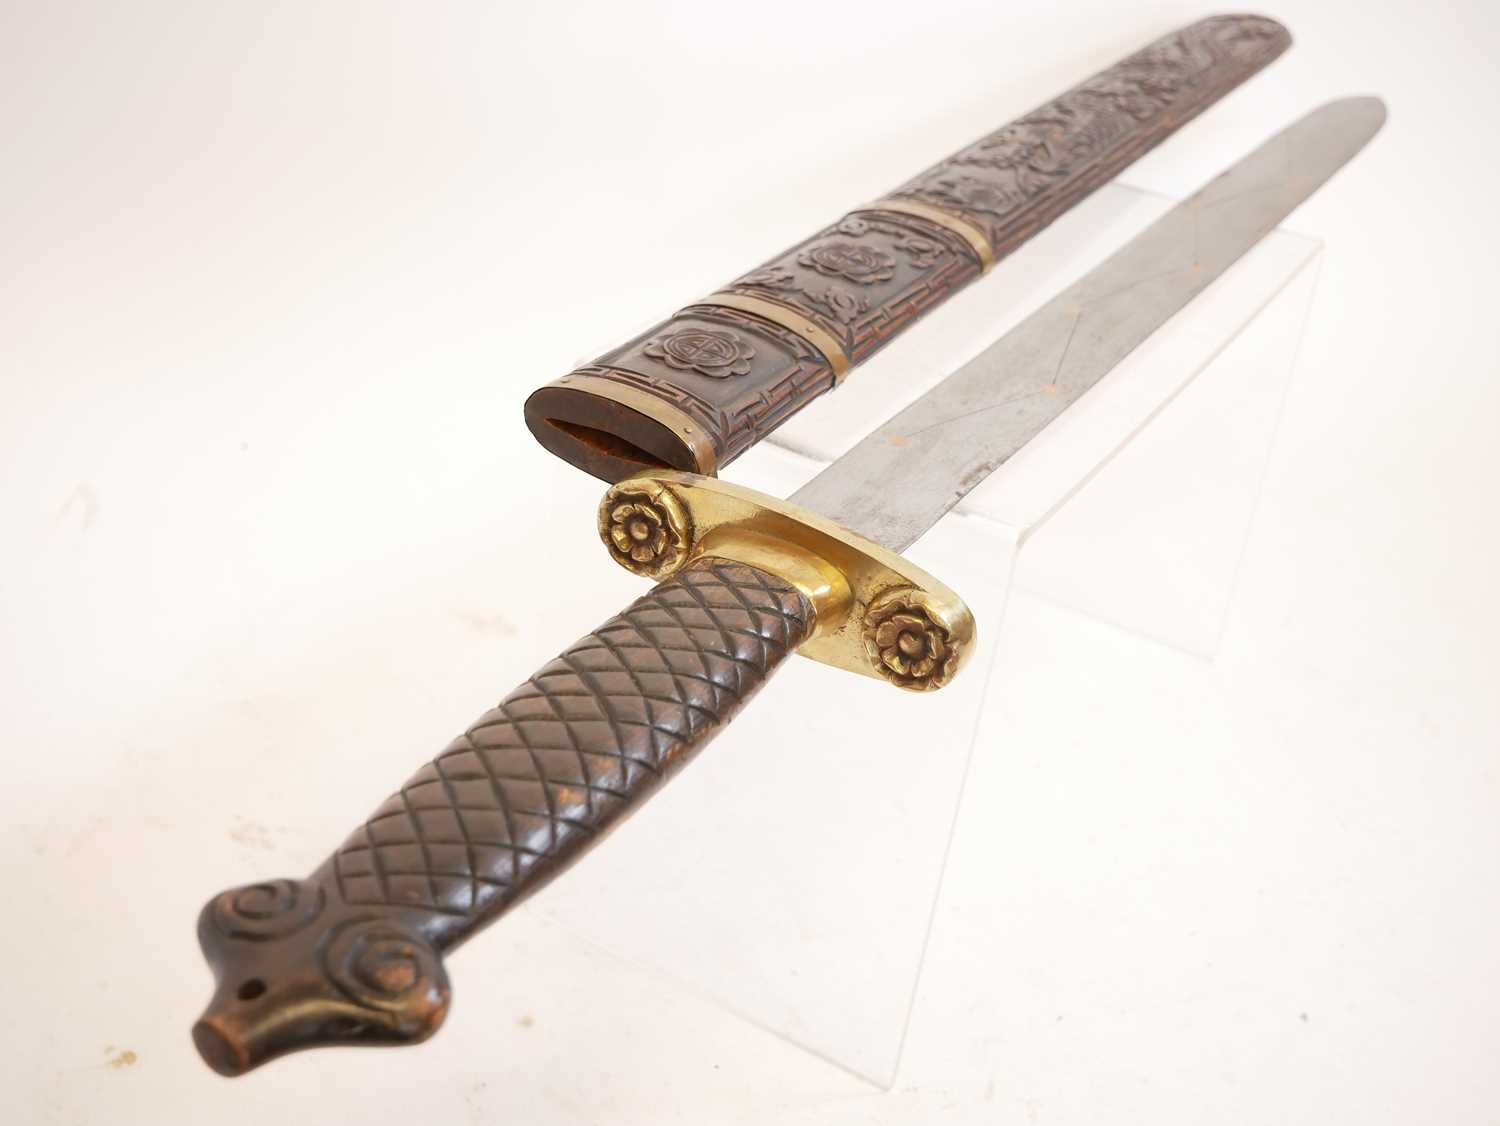 Chinese double edged sword, with copper studded blade, brass guard and carved grip and scabbard. - Image 7 of 7